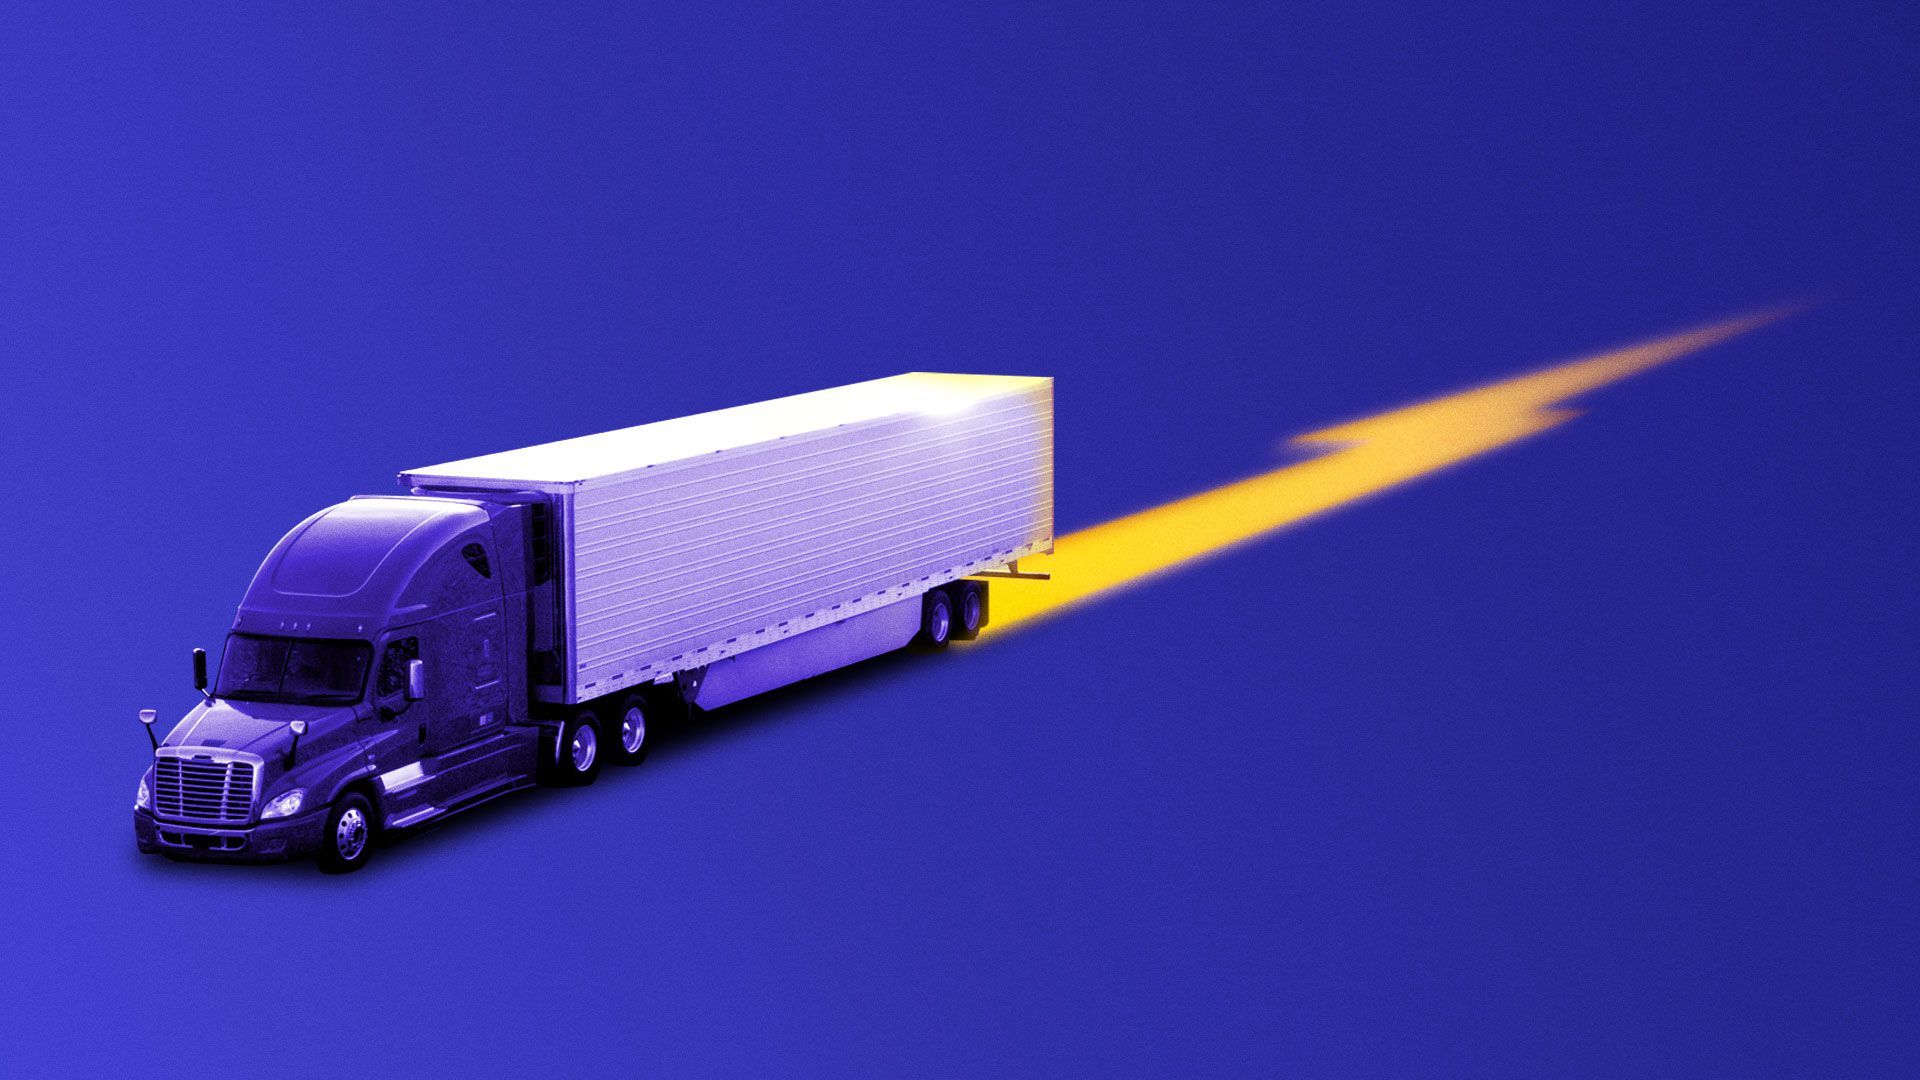 Illustration of a commercial electric truck leaving lighting bolt tracks behind it